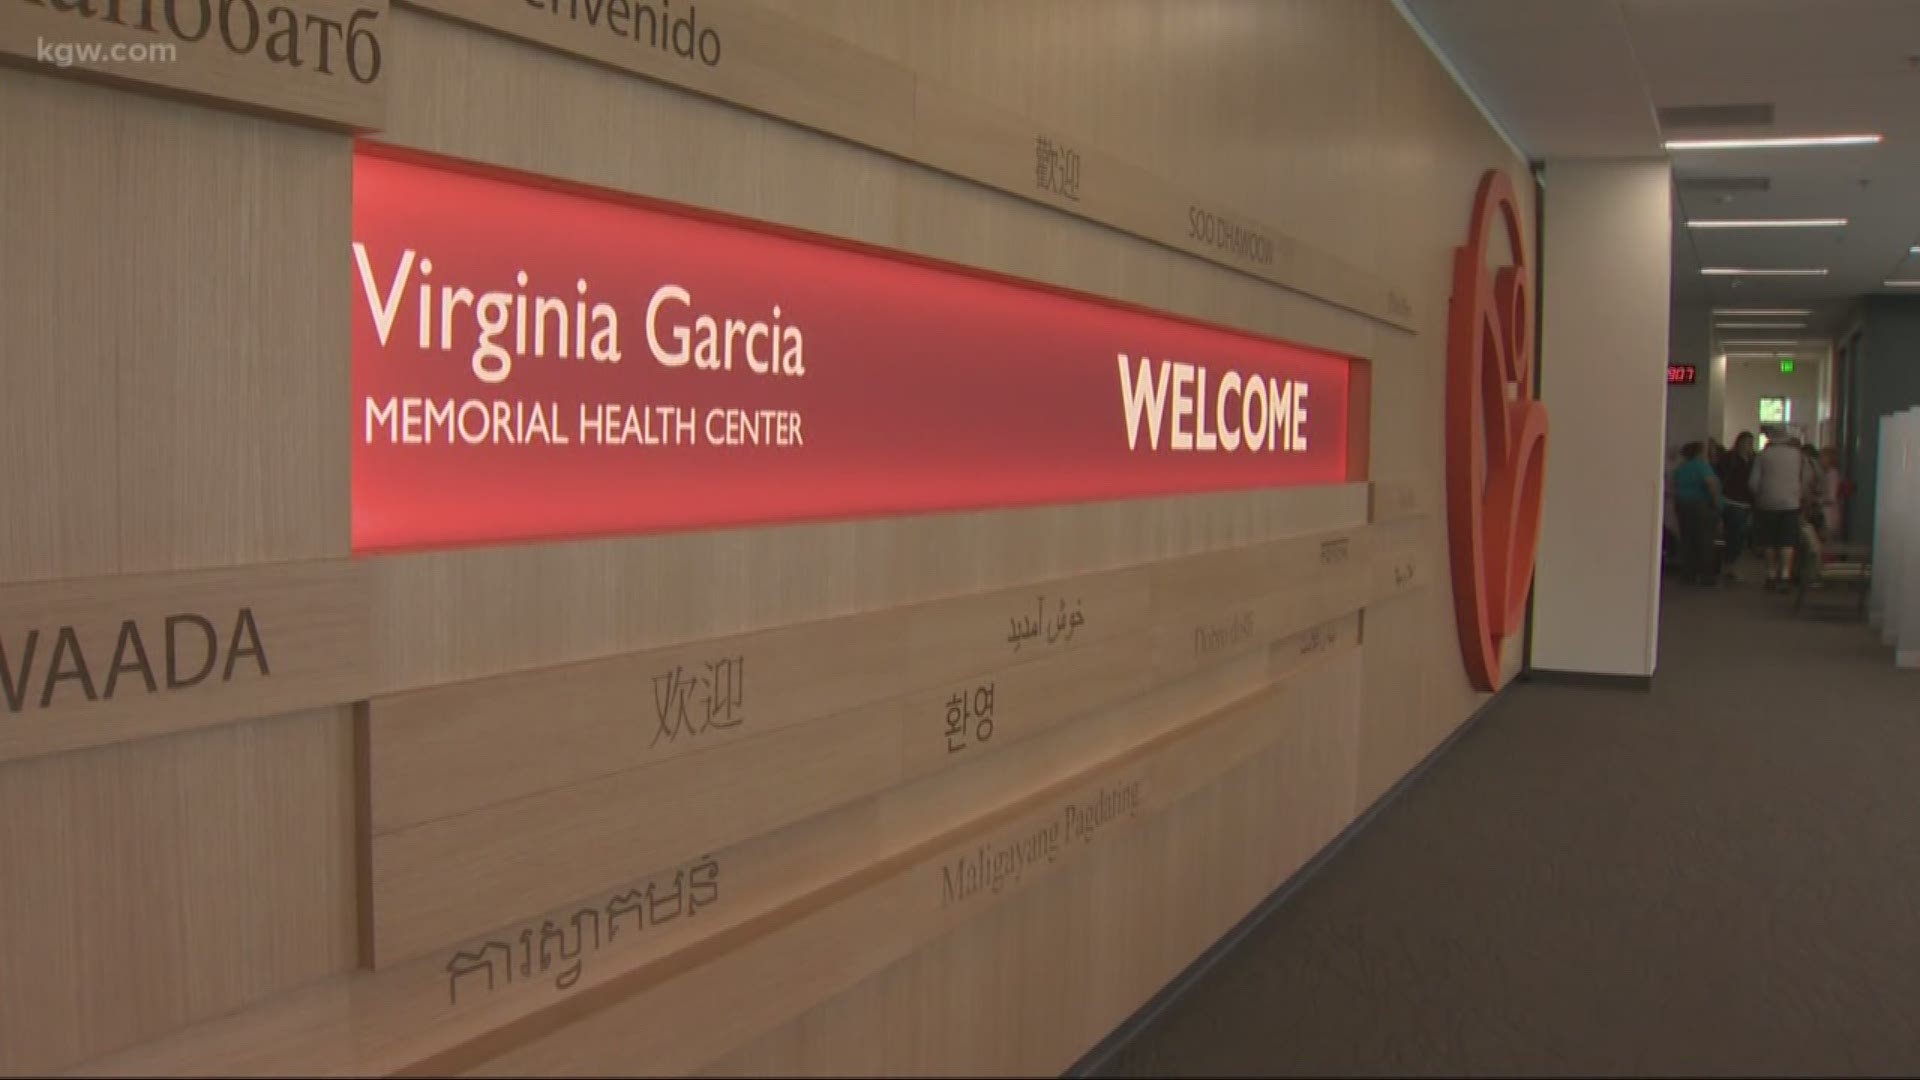 The new Virginia Garcia Memorial Health Center opens in Beaverton, offering medical, dental, a pharmacy, and mental health services to the community.